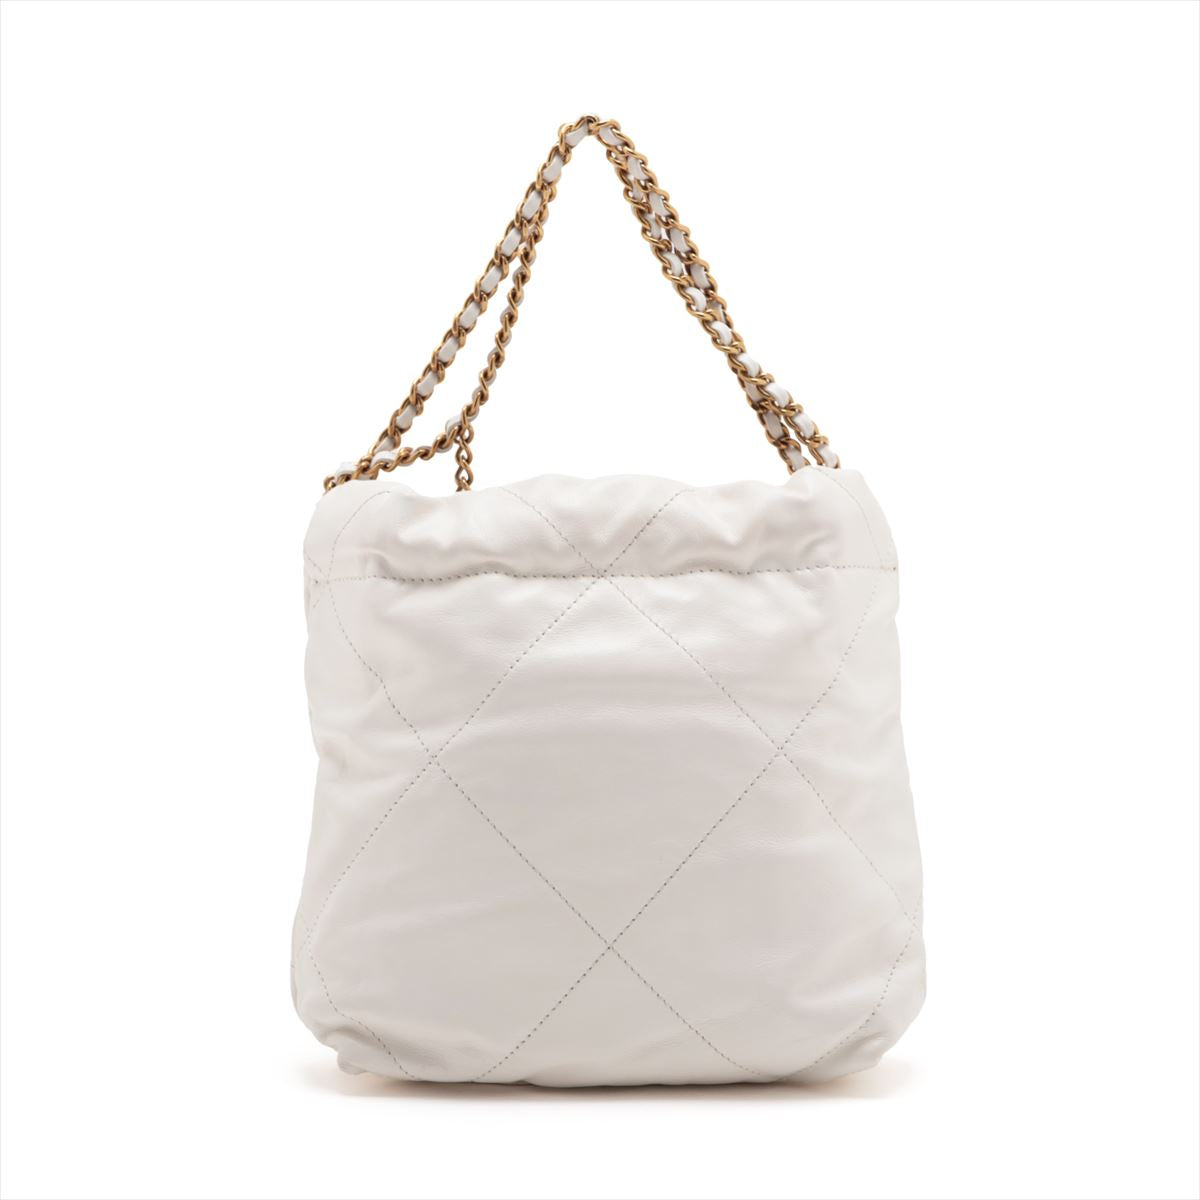 Chanel 22 Mini Leather Chain Shoulder Bag White G  AS3980